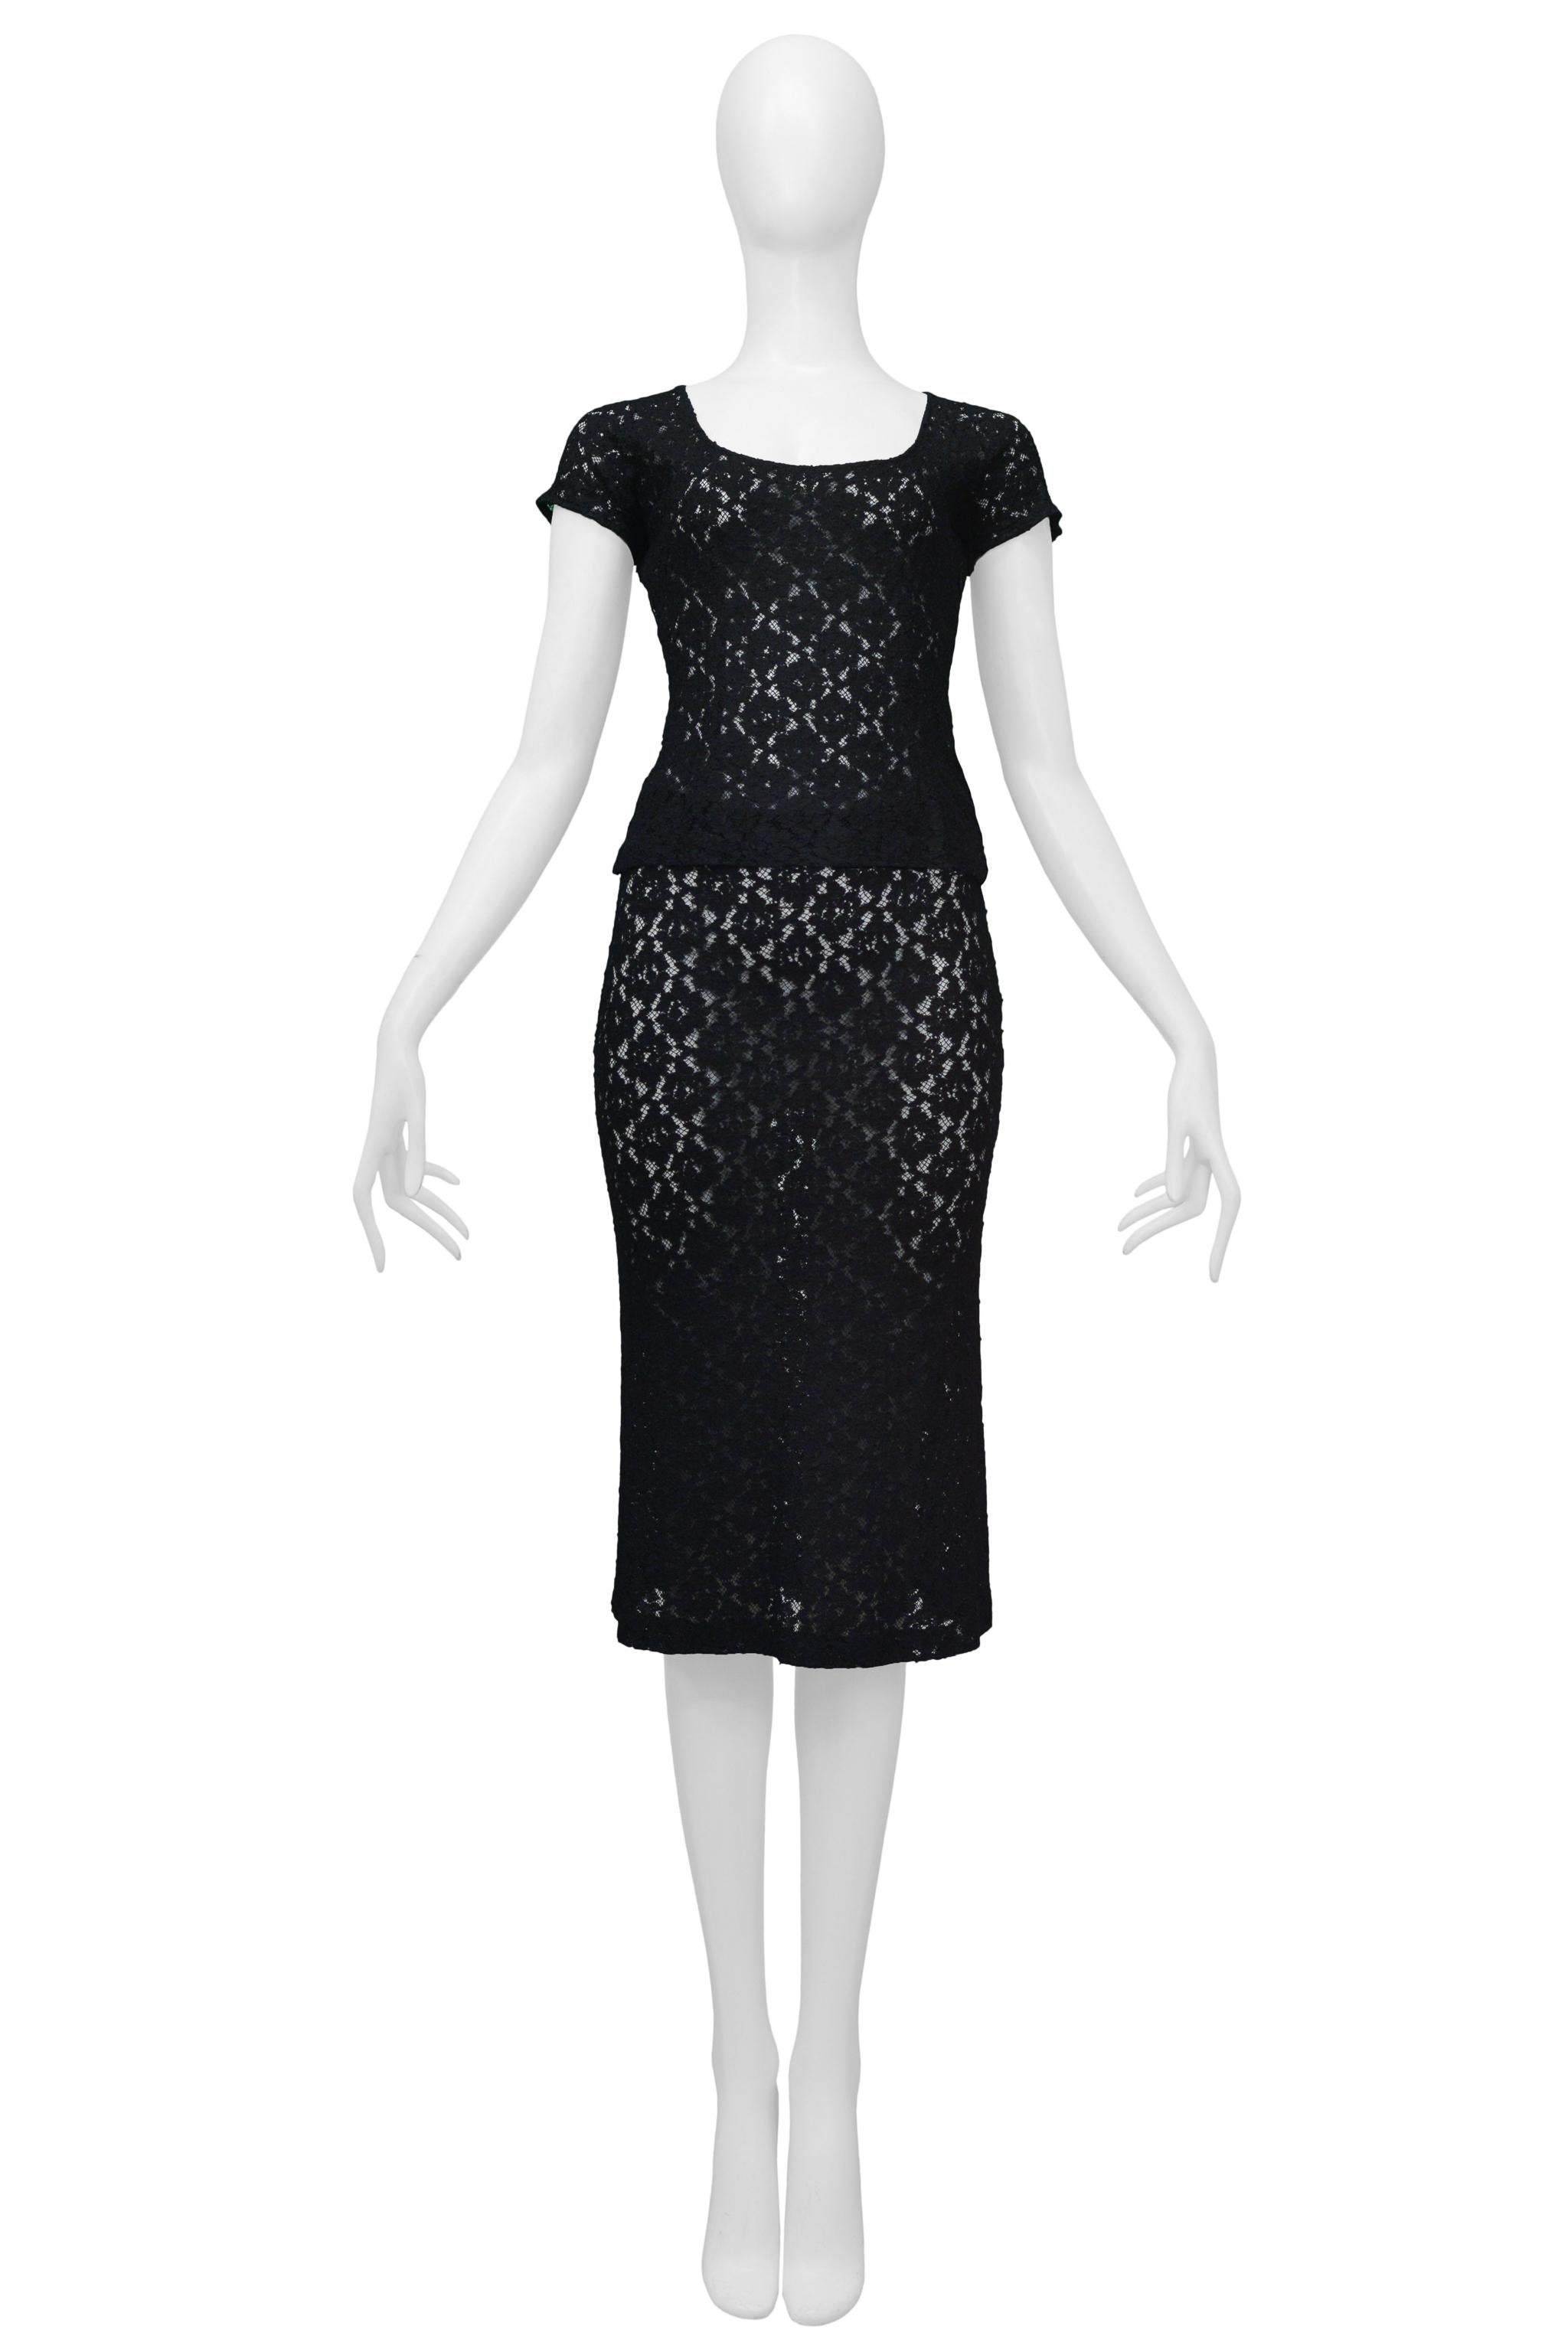 Dolce & Gabbana Black Floral Lace Top And Skirt Ensemble 1990s For Sale 2